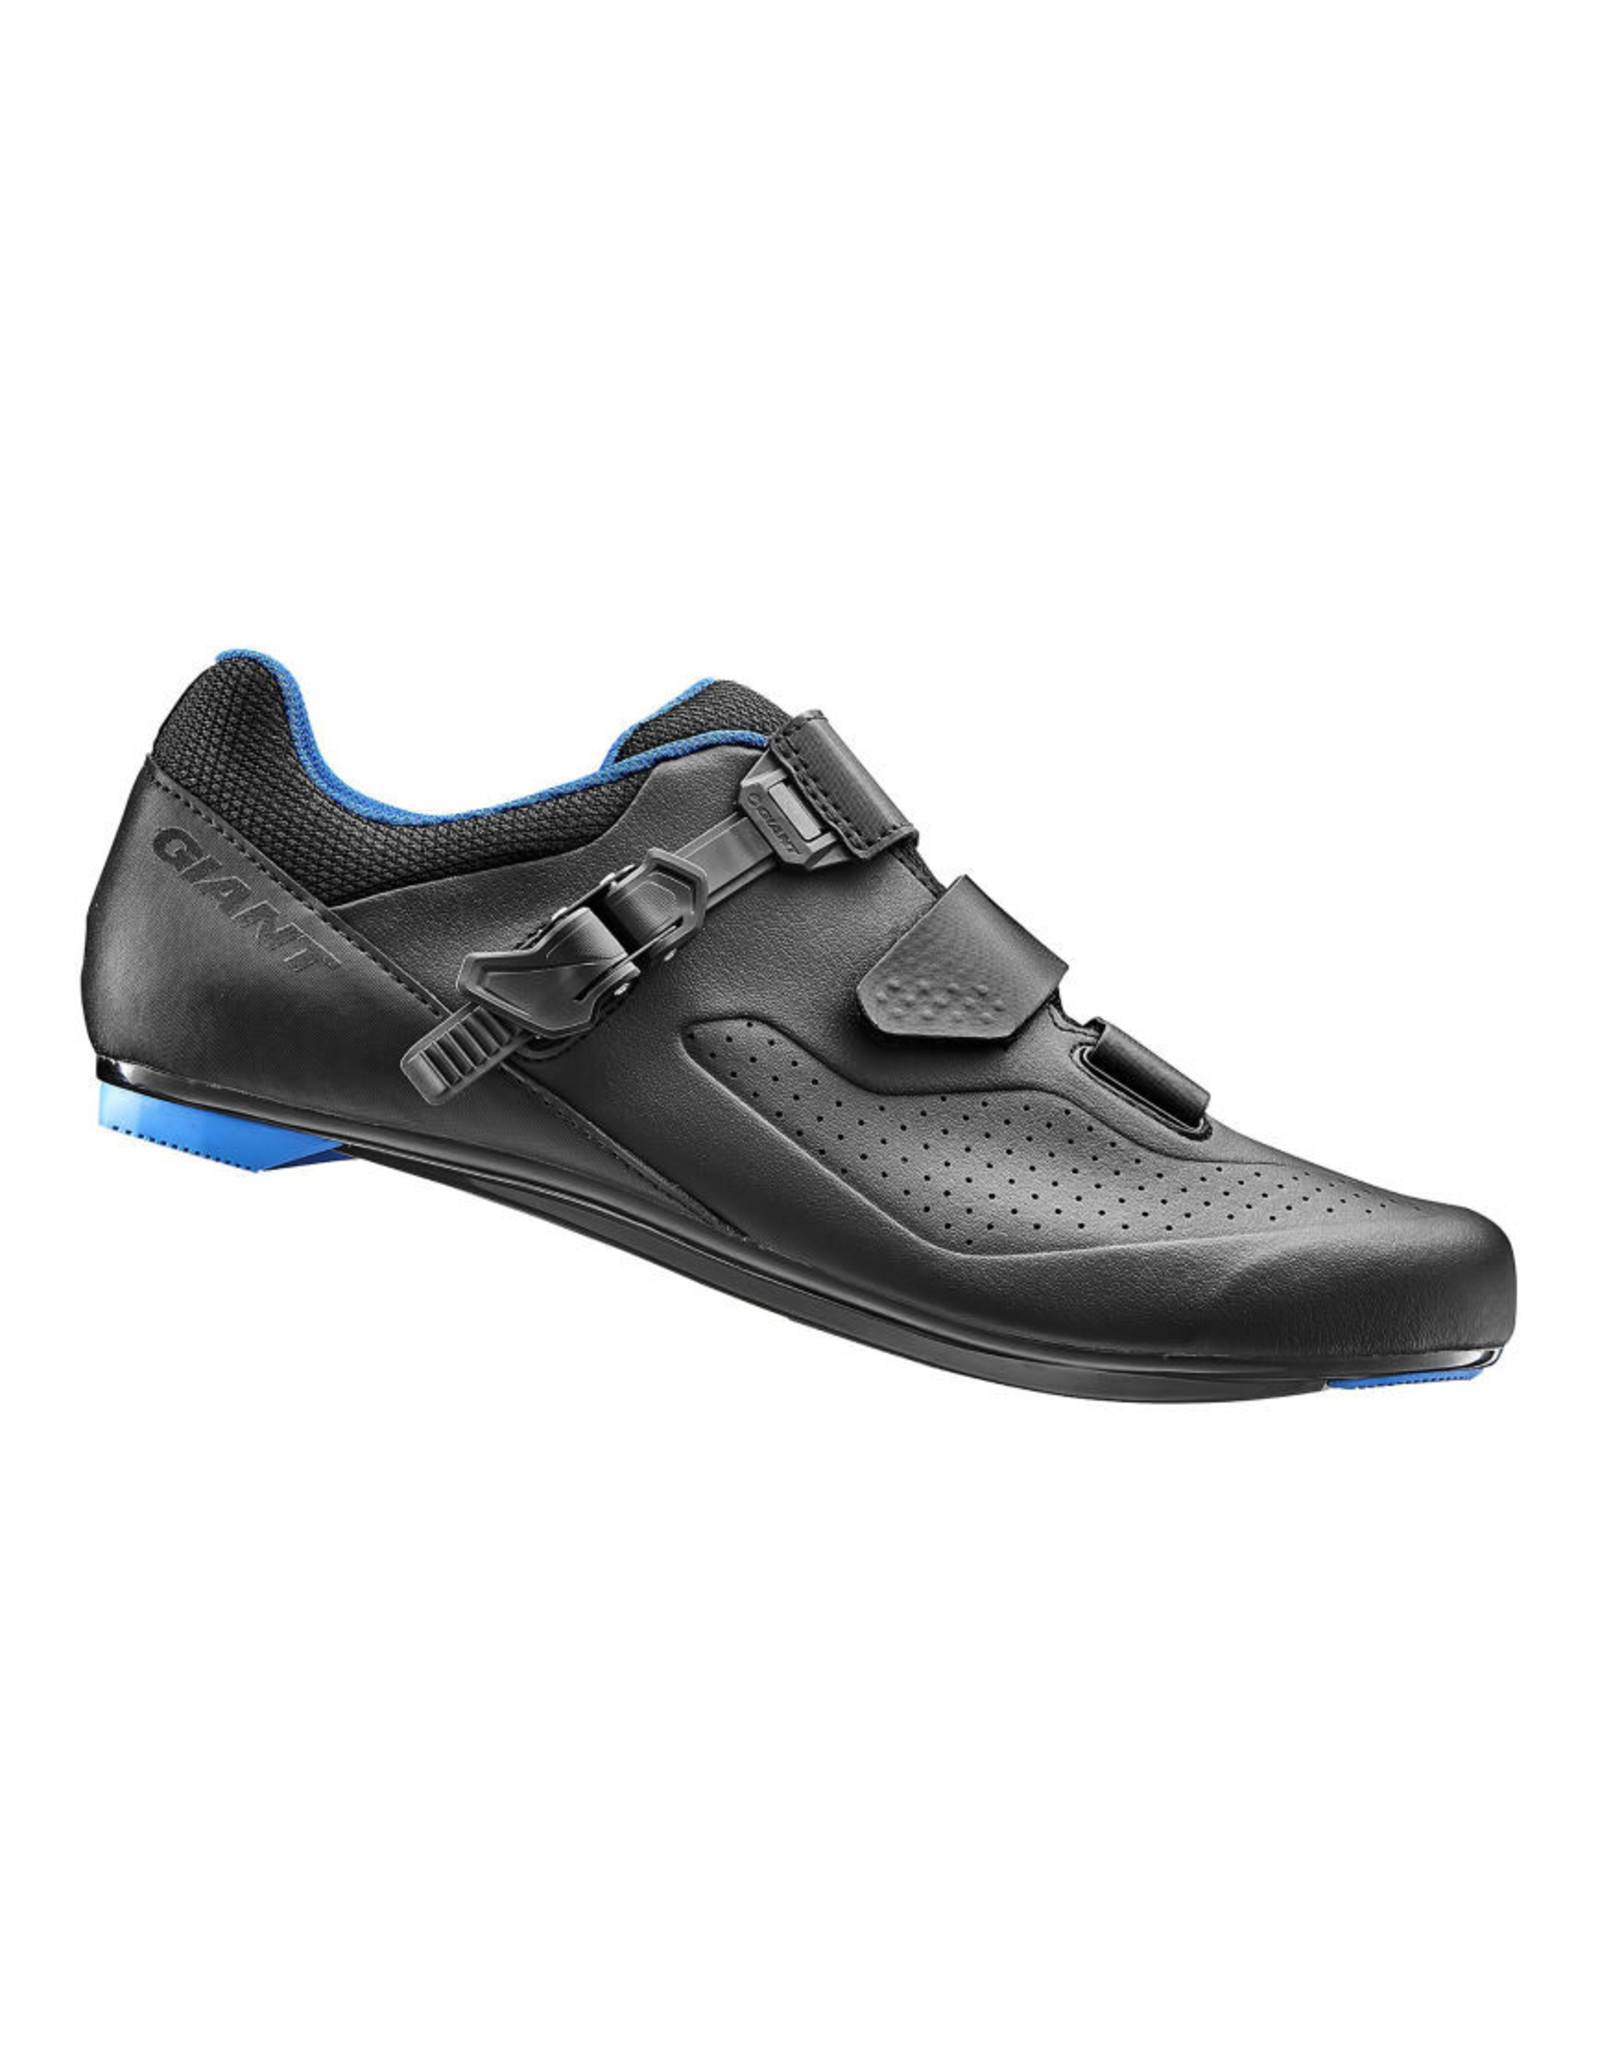 GIANT BICYCLES Giant Men's Phase 2 Shoe 2020